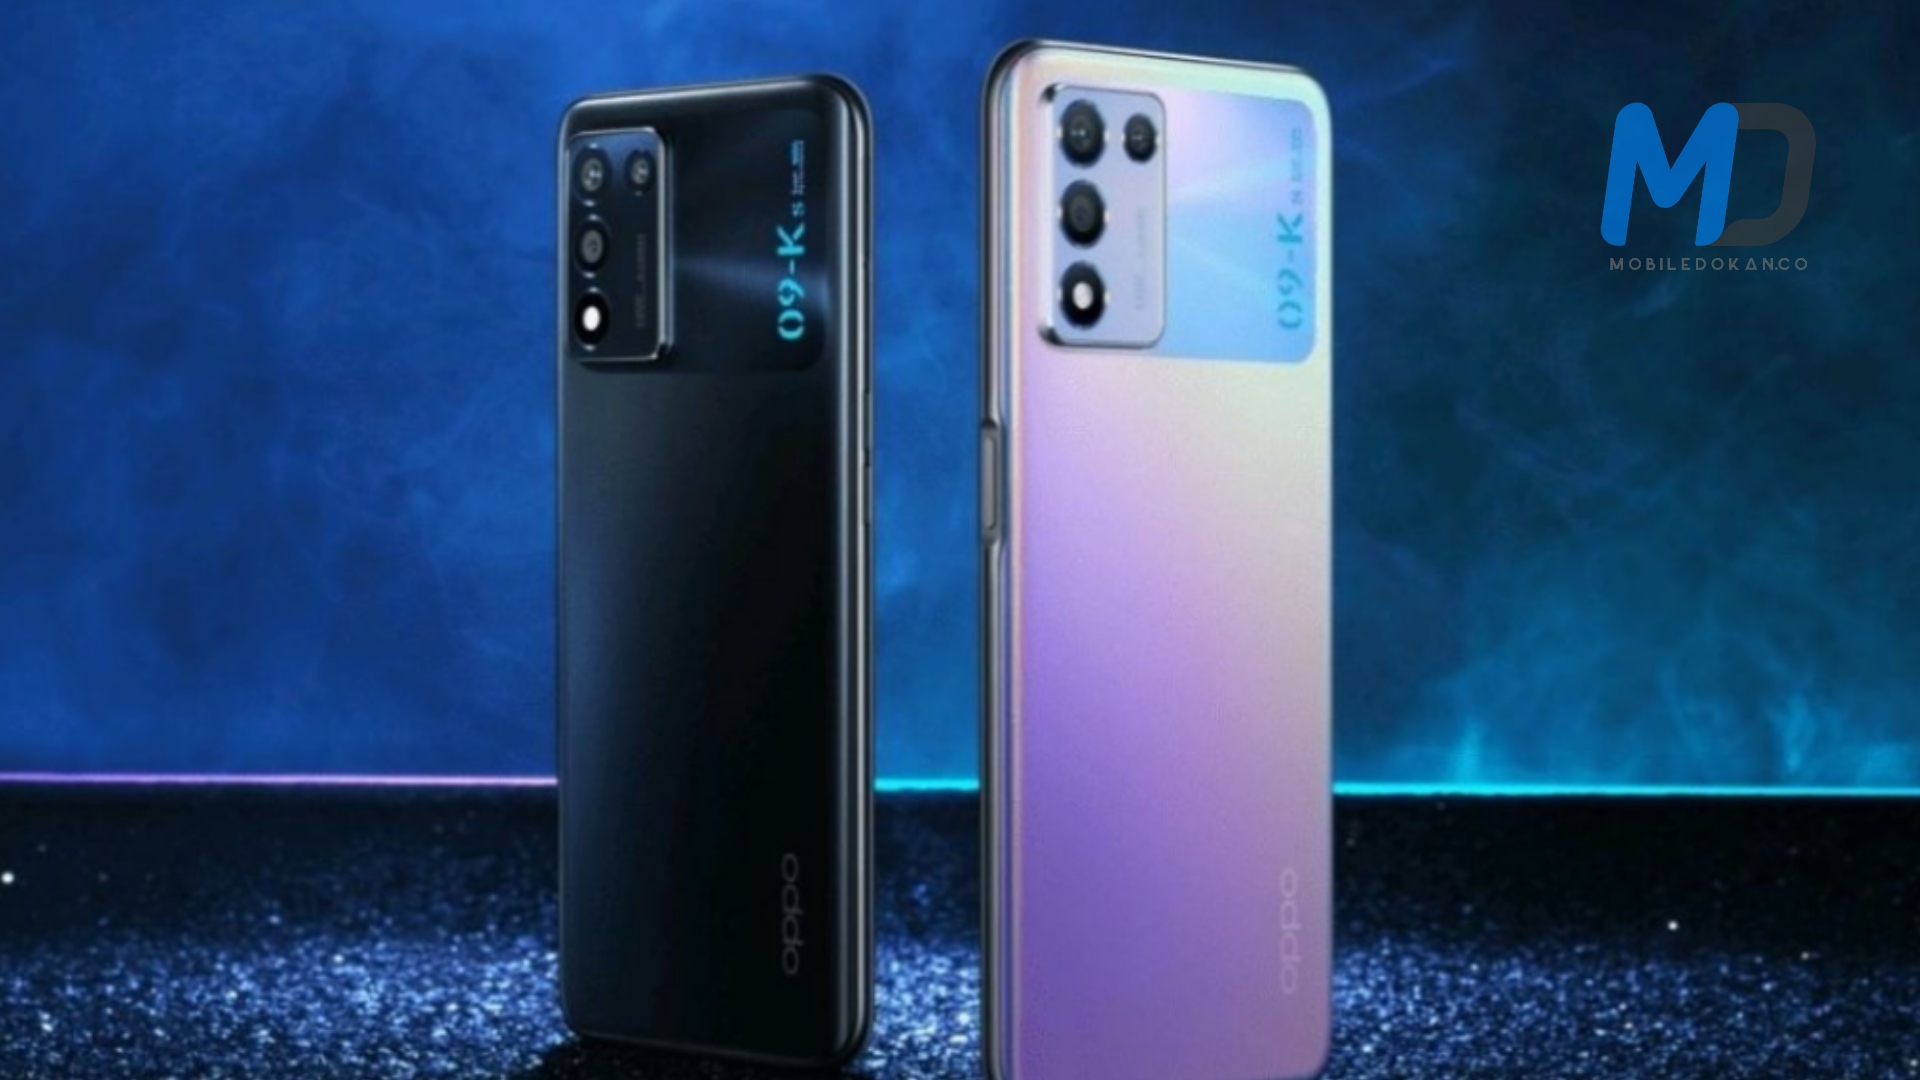 Oppo K9 Sale starts in China recently